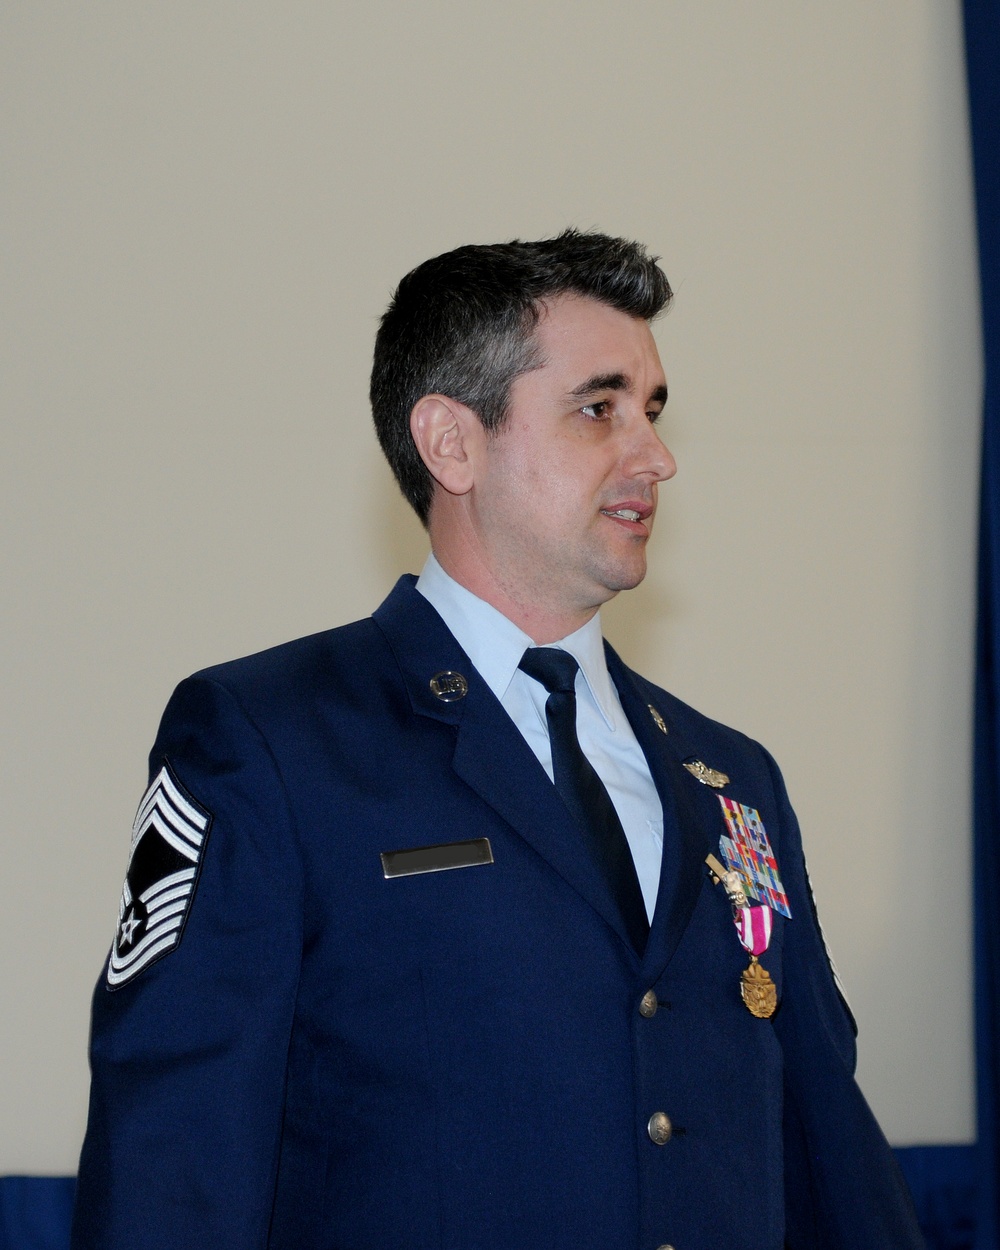 Chief Master Sergeant retires after 22 years of service